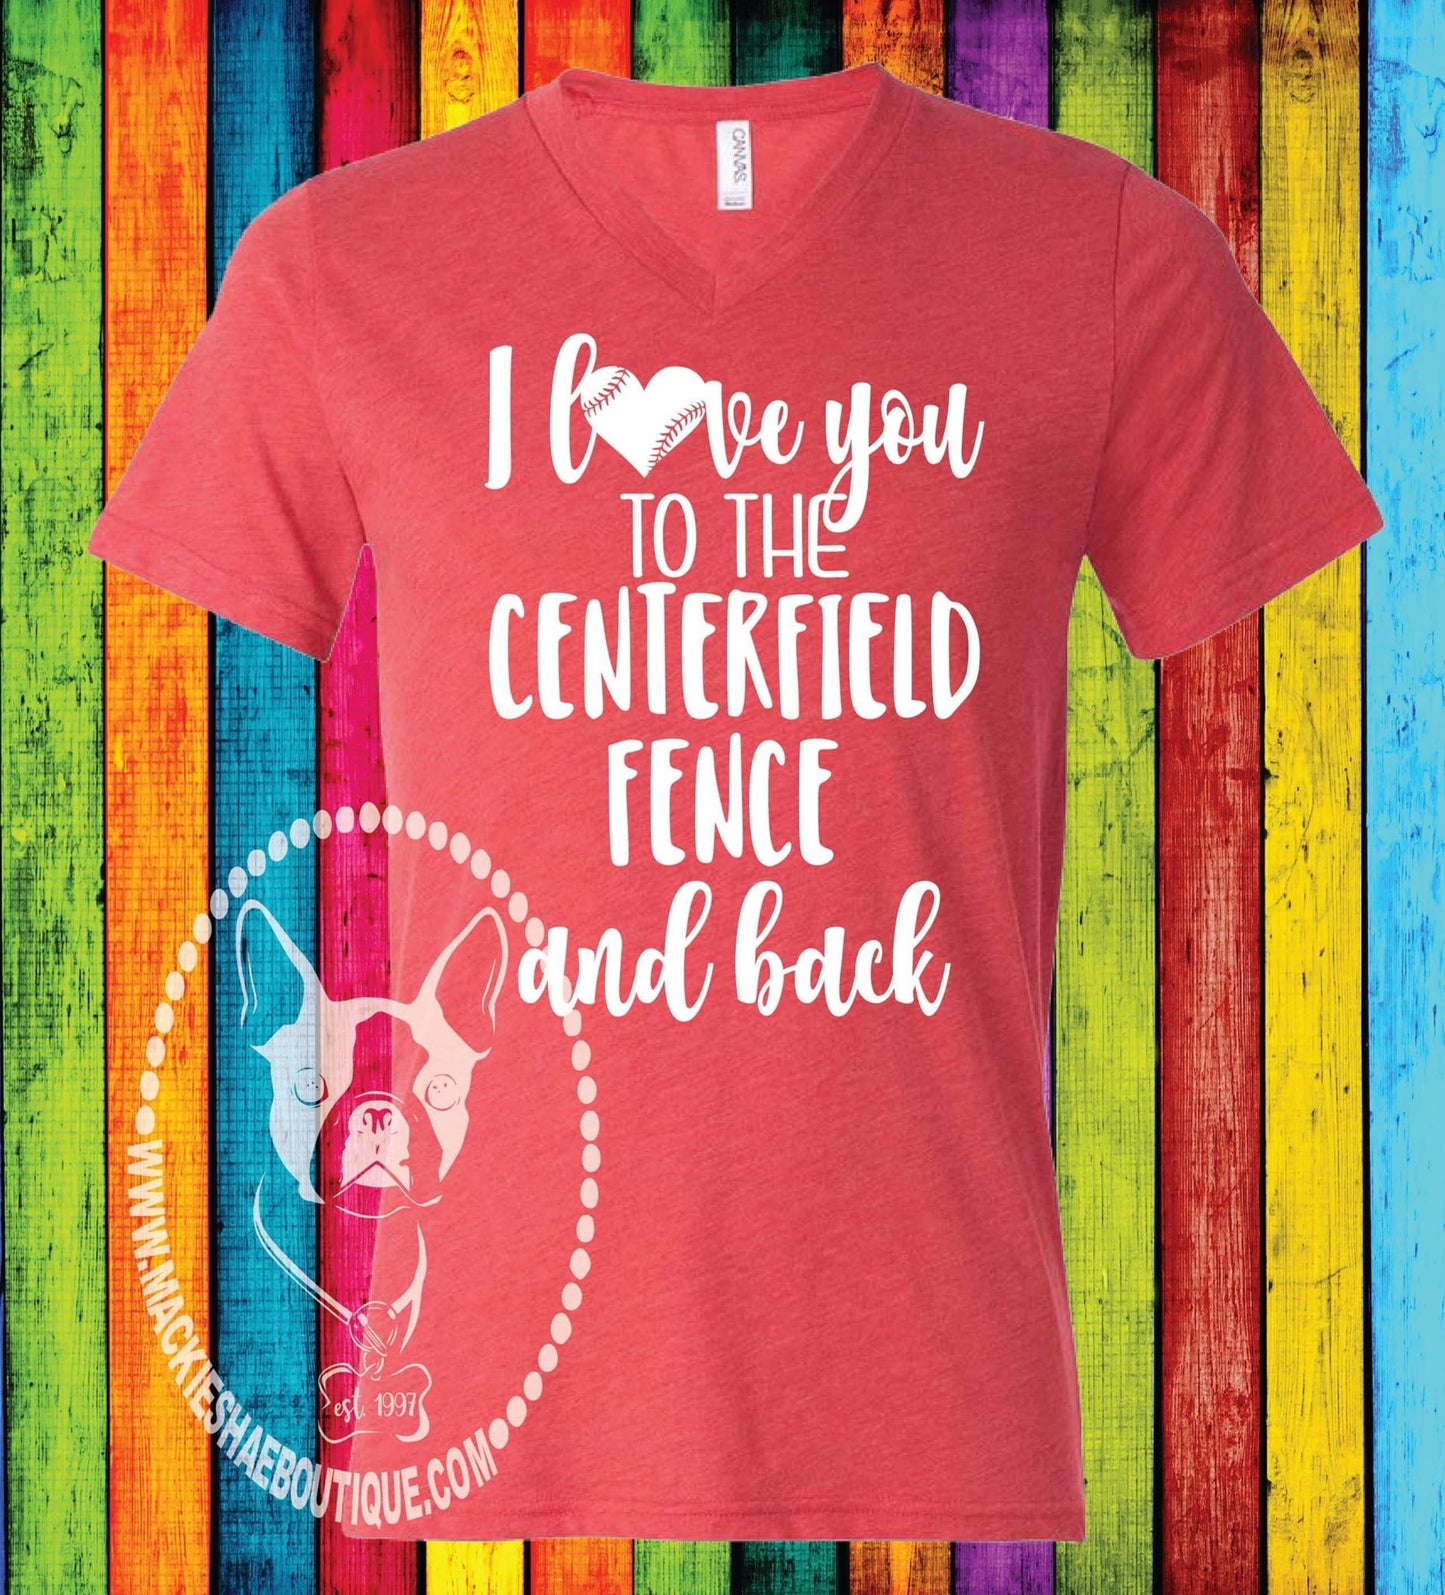 I Love You to The Centerfield Fence and Back Custom Shirt, Short Sleeve